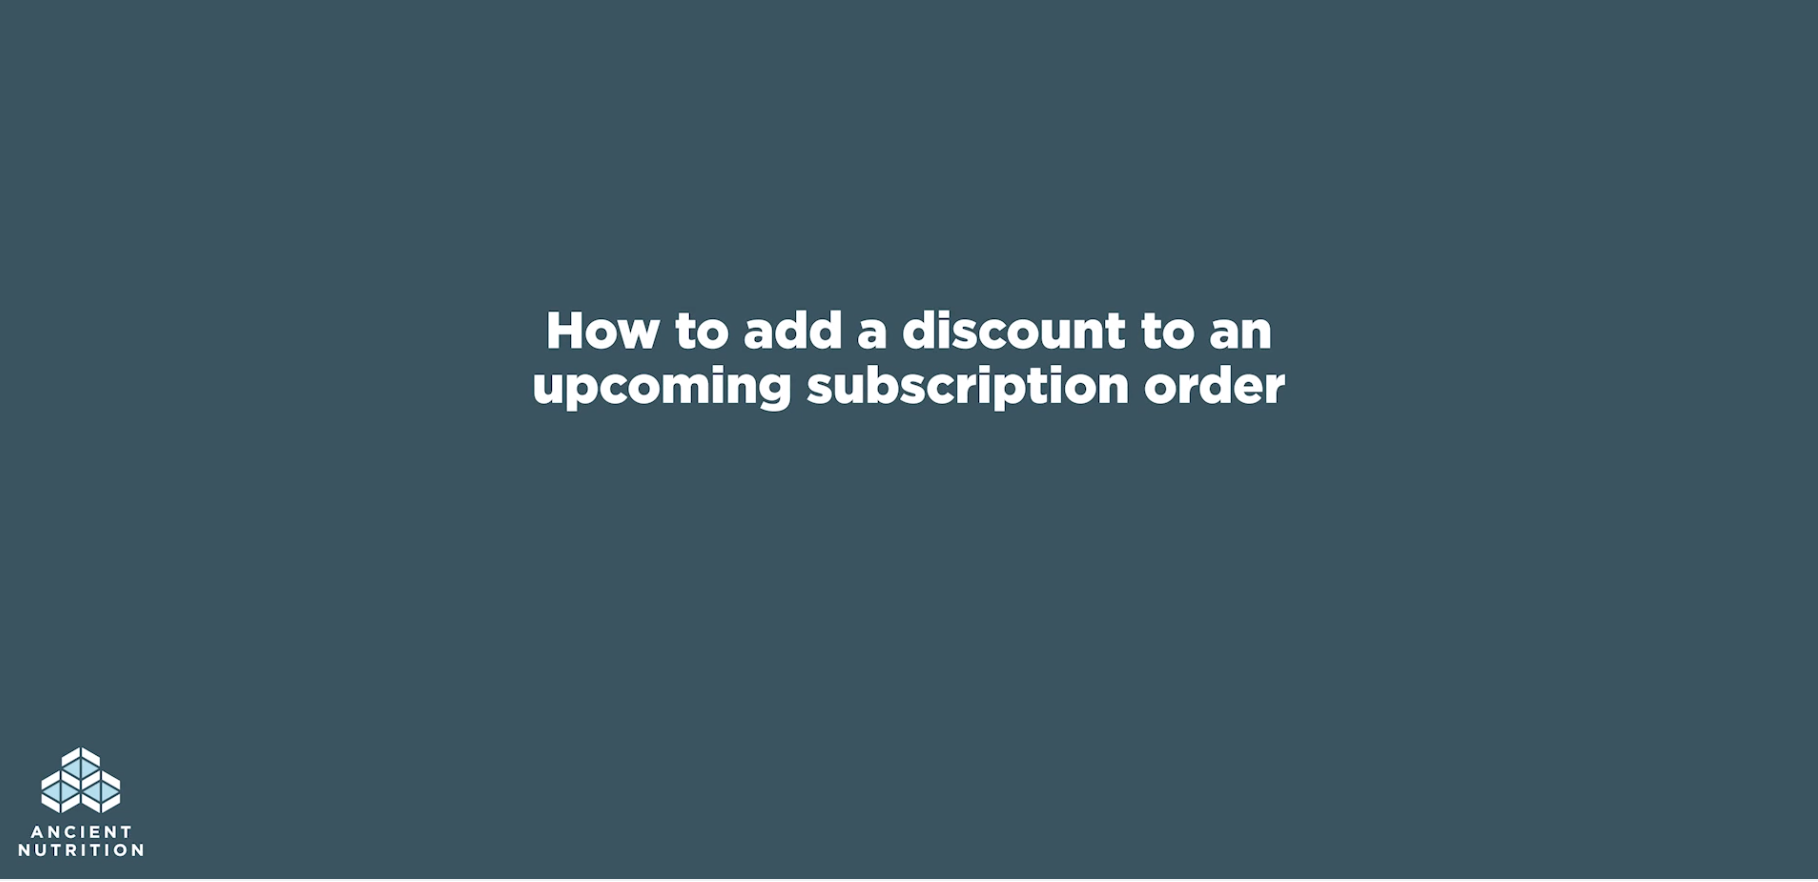 How to add a discount to an upcoming subscription order